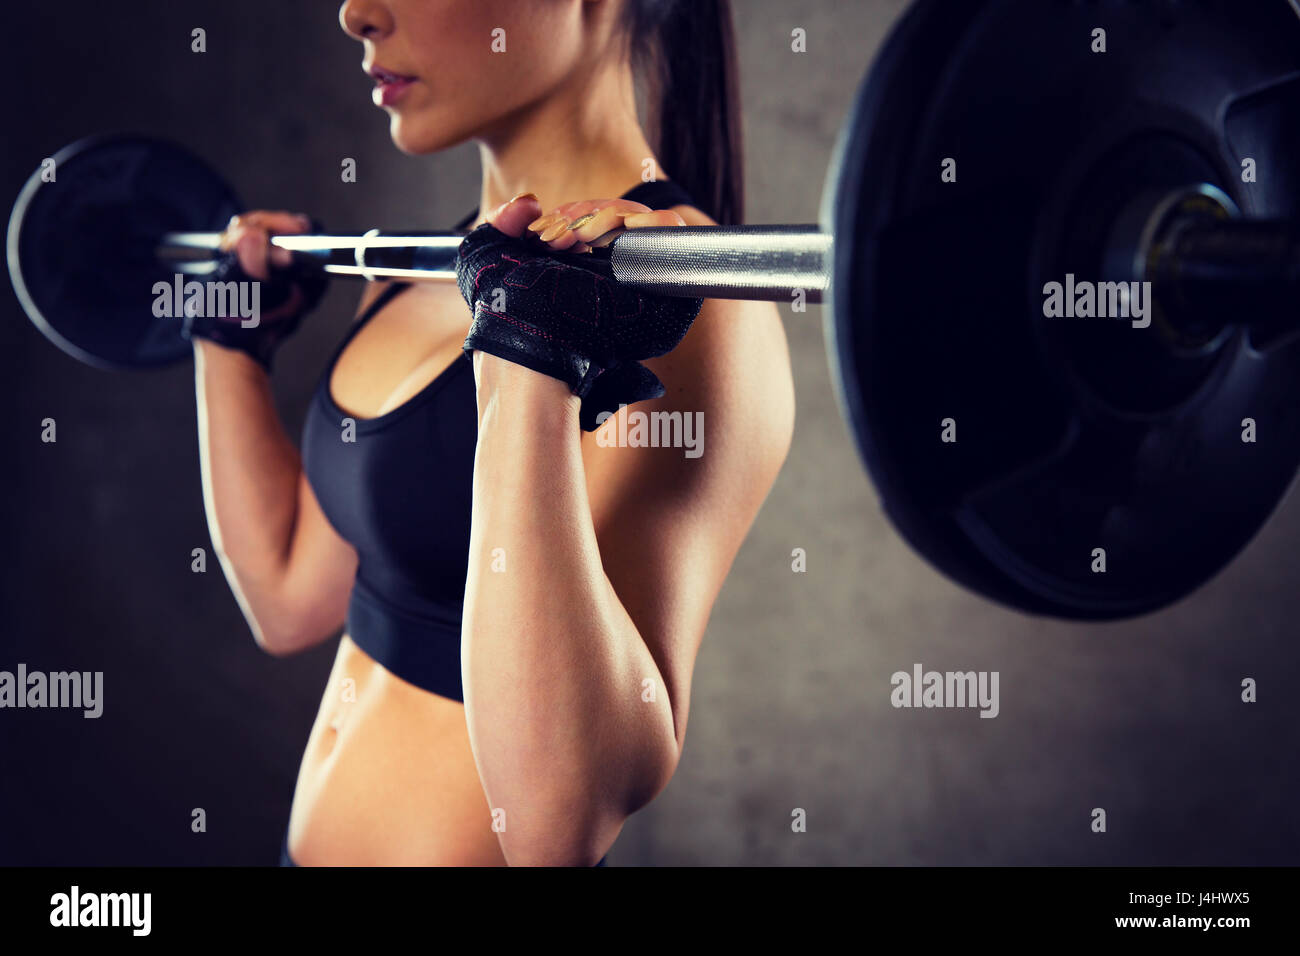 Tough young woman exercising with barbell. Determined female athlete  lifting heavy weights Stock Photo - Alamy